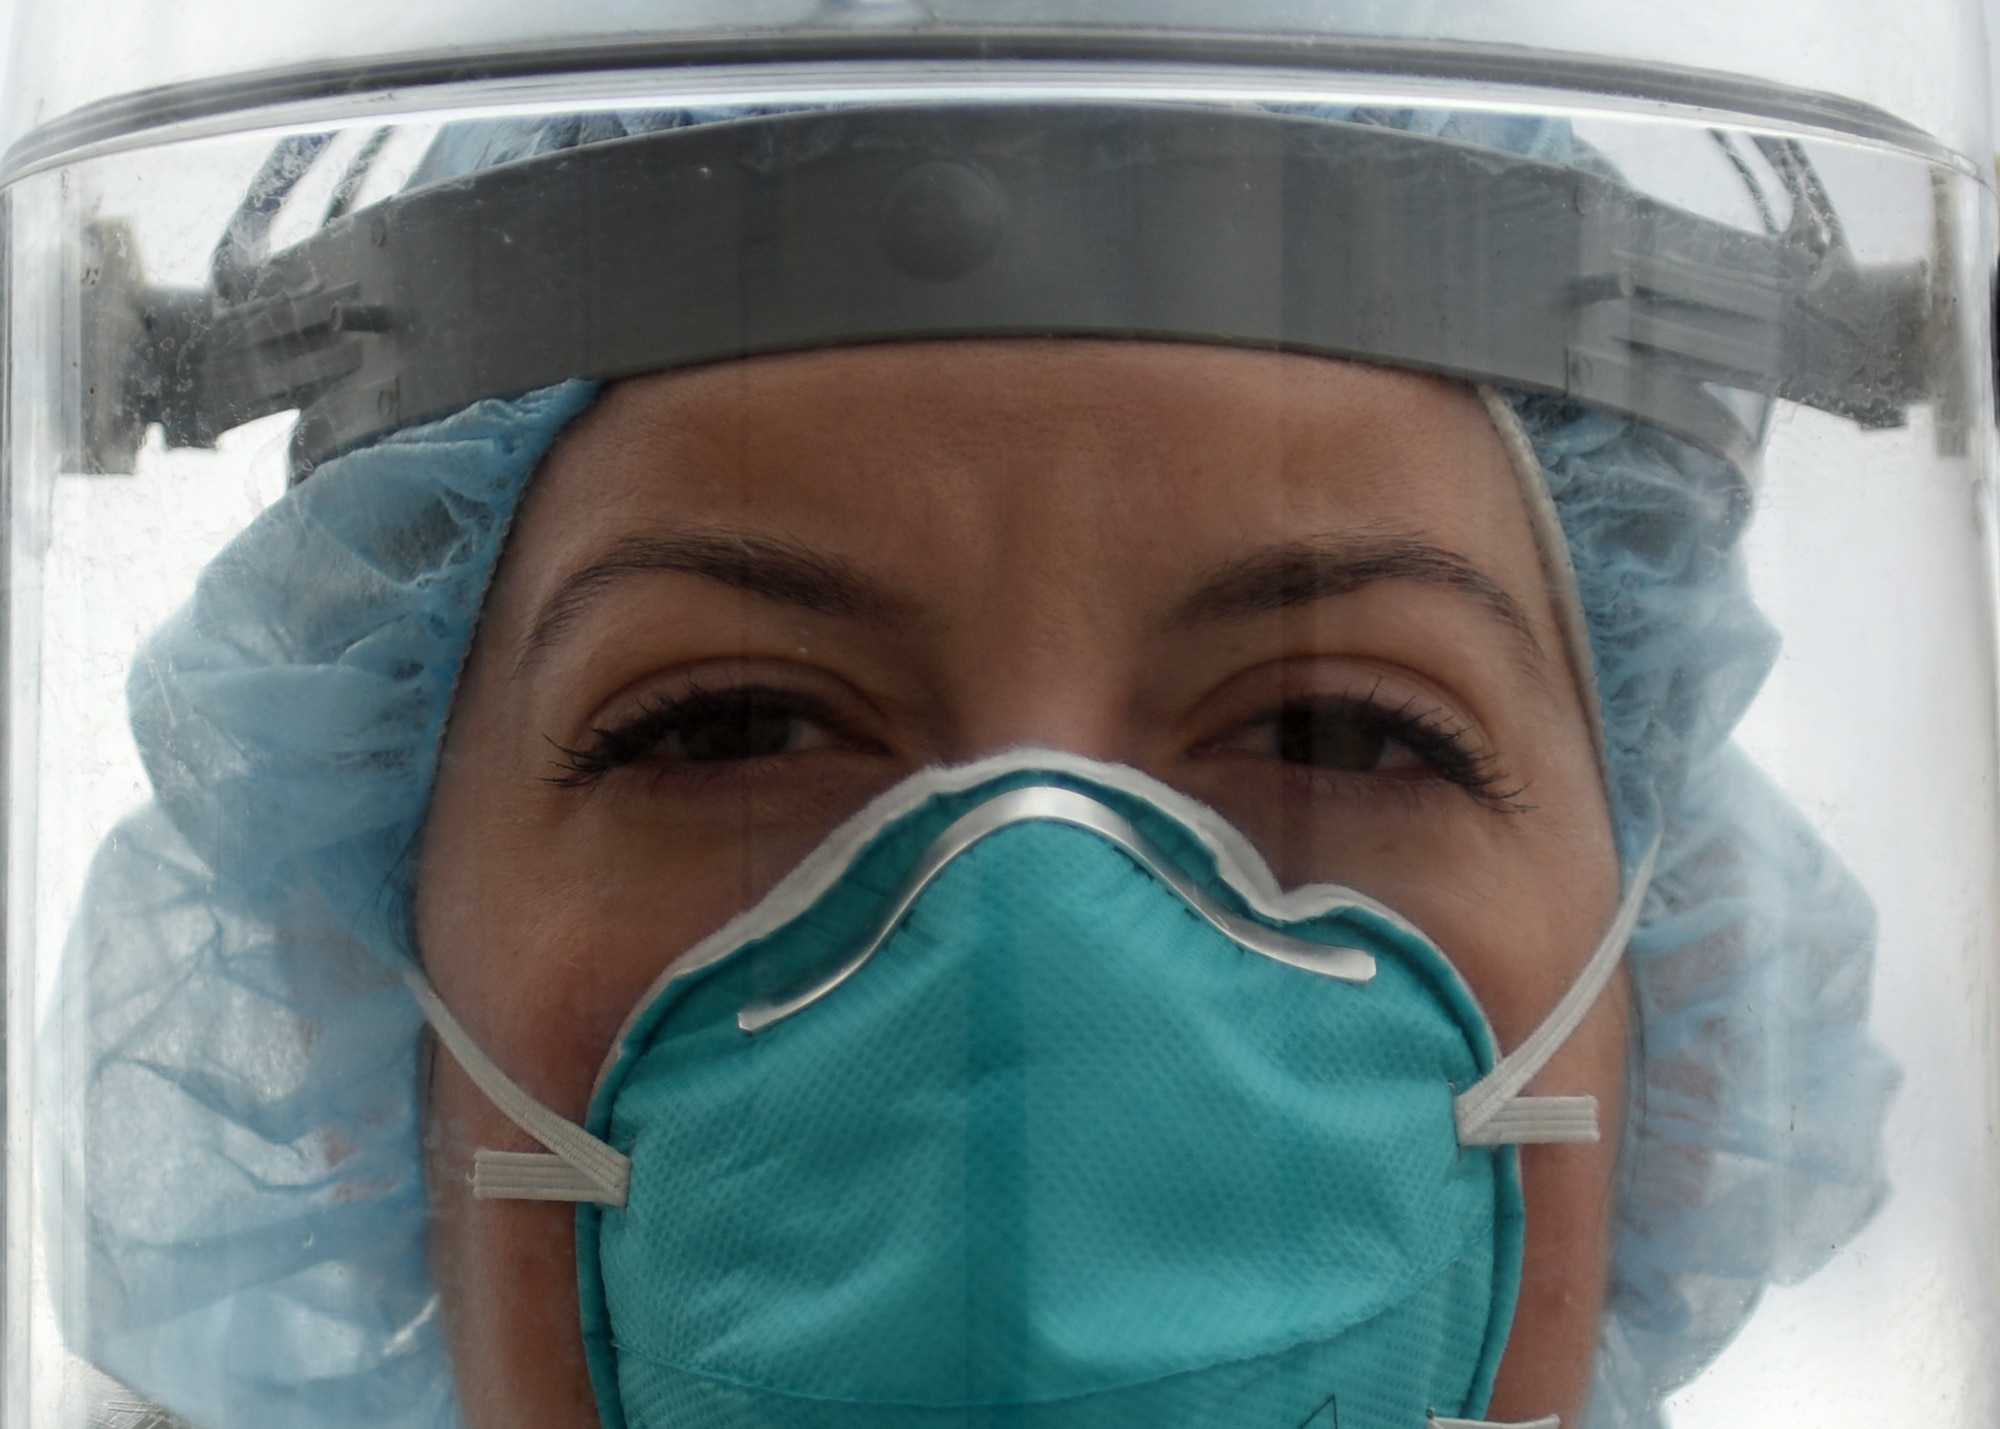 A portrait of an Air Force nurse wearing facial protective gear.